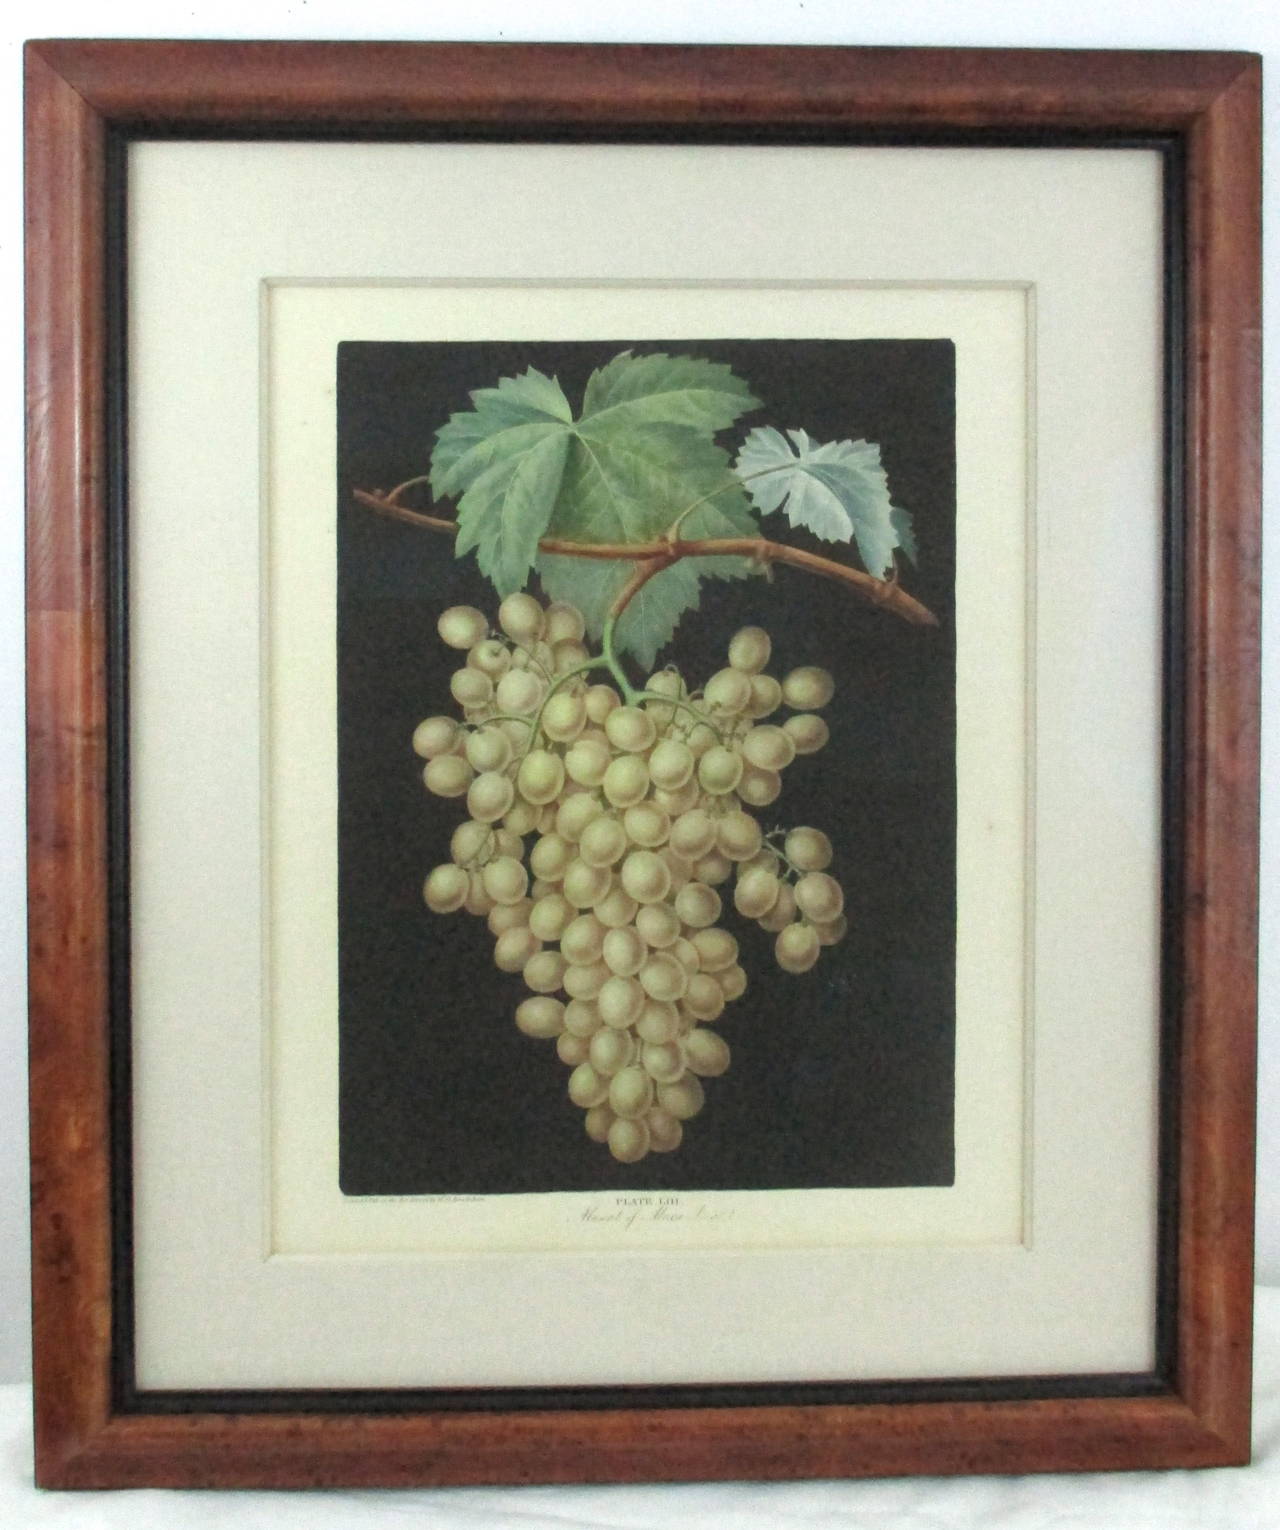 Hand colored aquatint by george brookshaw of the "Muscat Grapes of Alexandria". One of the standout images from george brookshaw's "Pomona Britantica" printed in 1812 with the rich details and coloration emerging from the brown